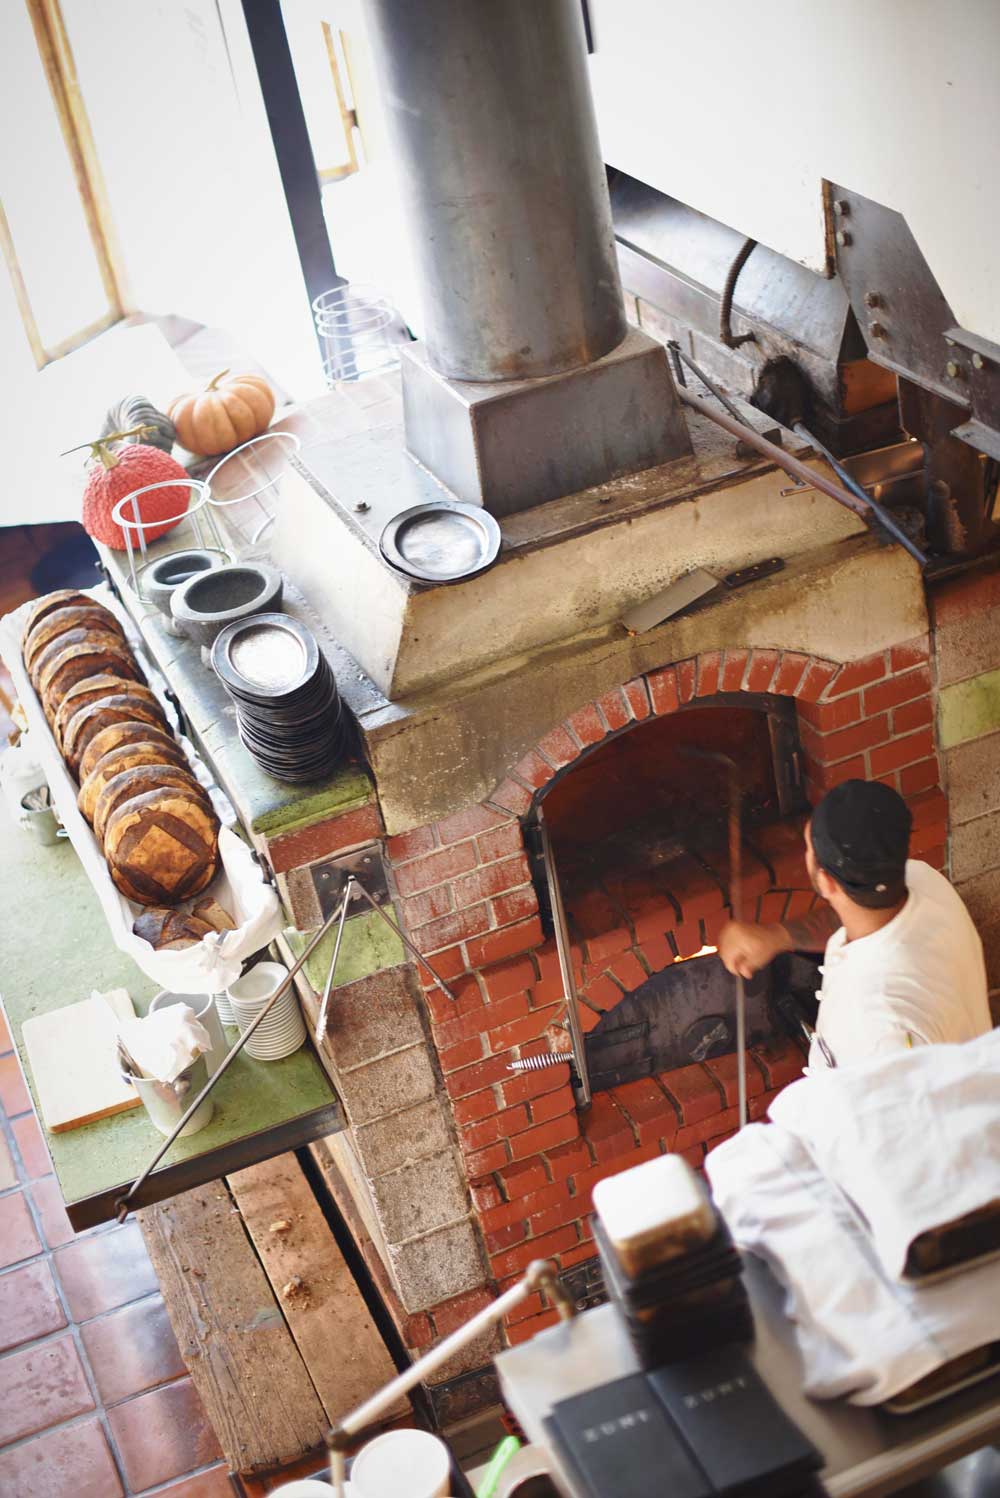 A chef cleans out the wood burning oven.